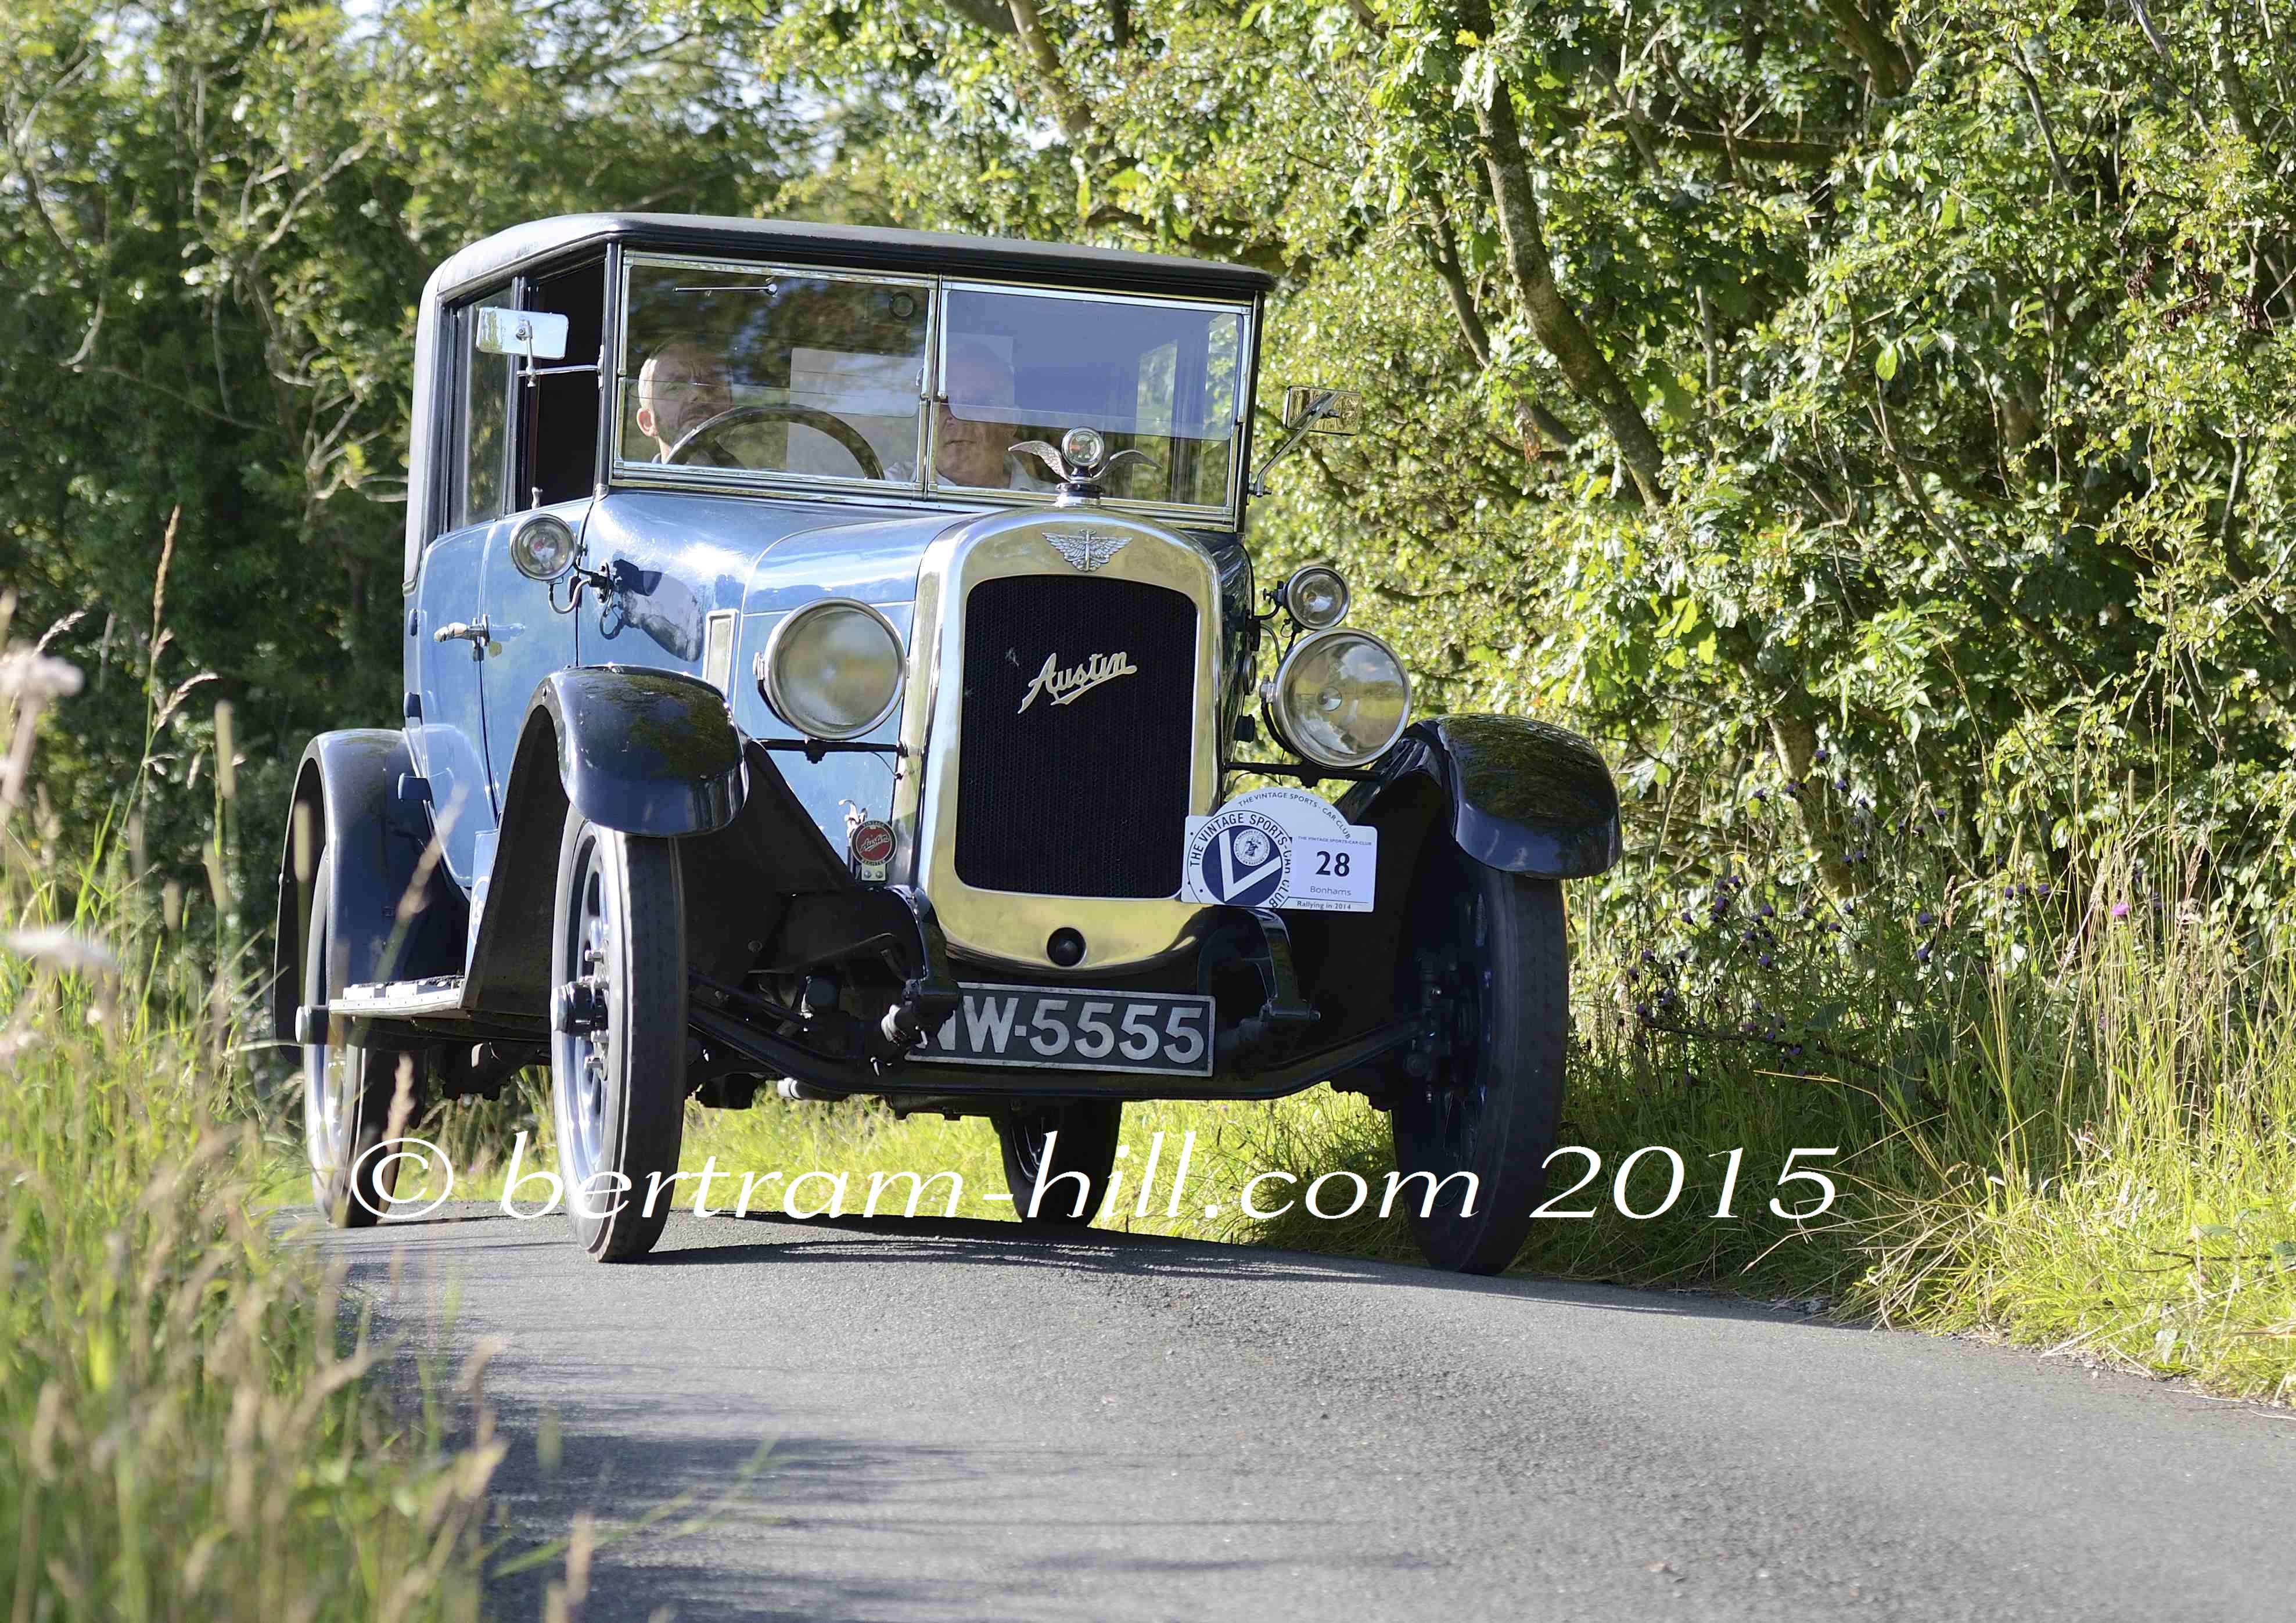 Suffolk to host the VSCC Eastern Rally this weekend cover